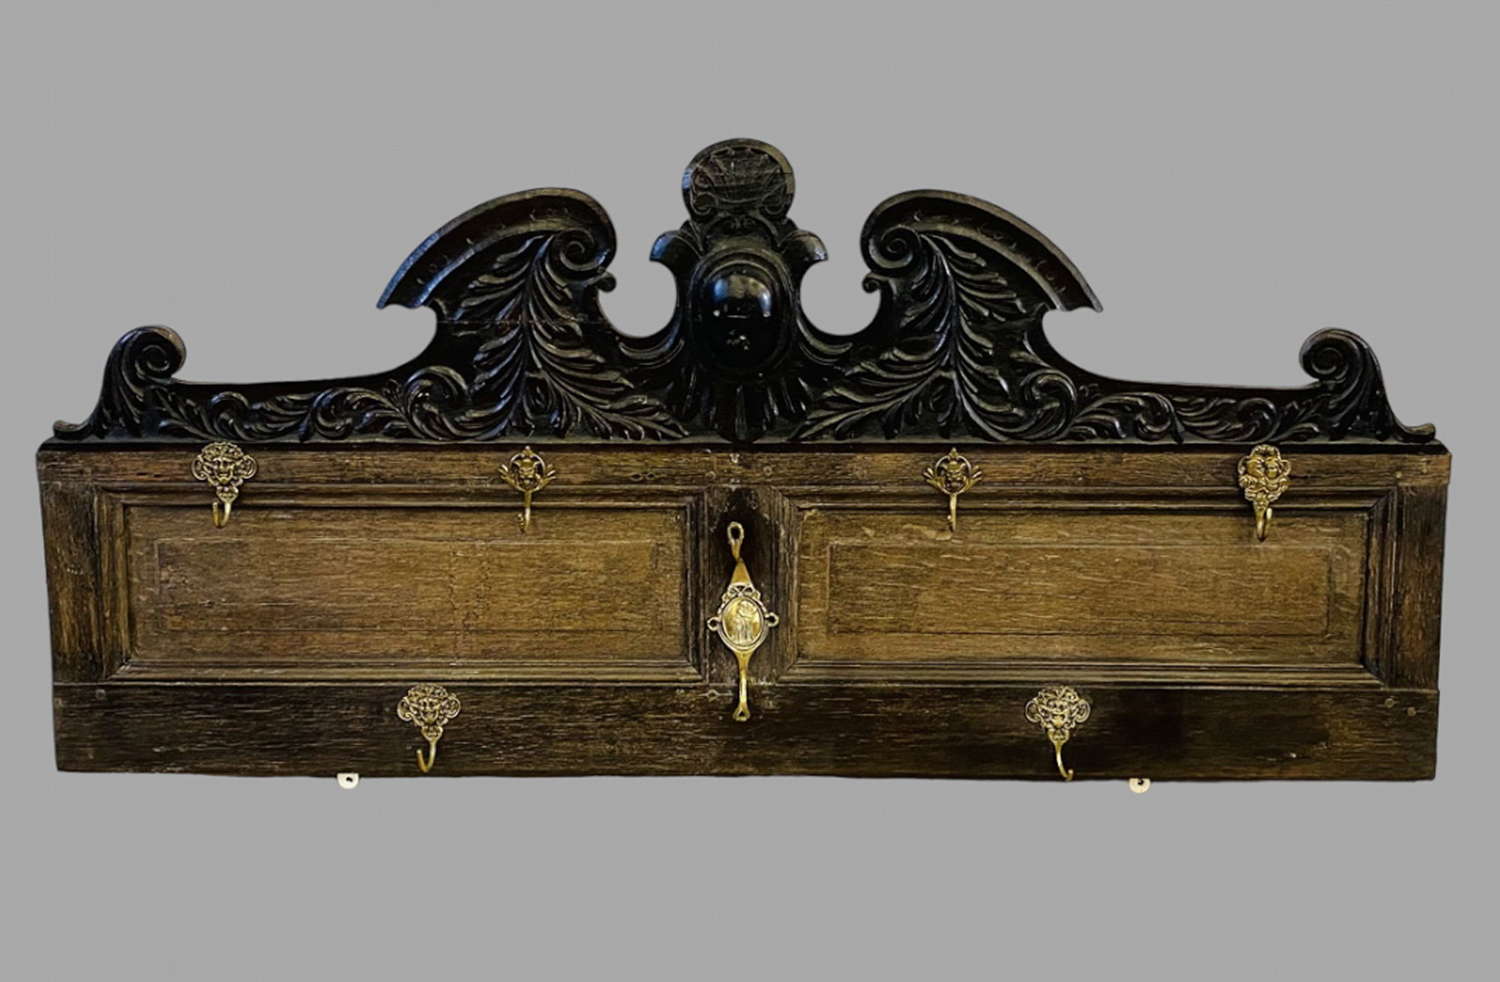 An Attractive and Decorative Coat Rack